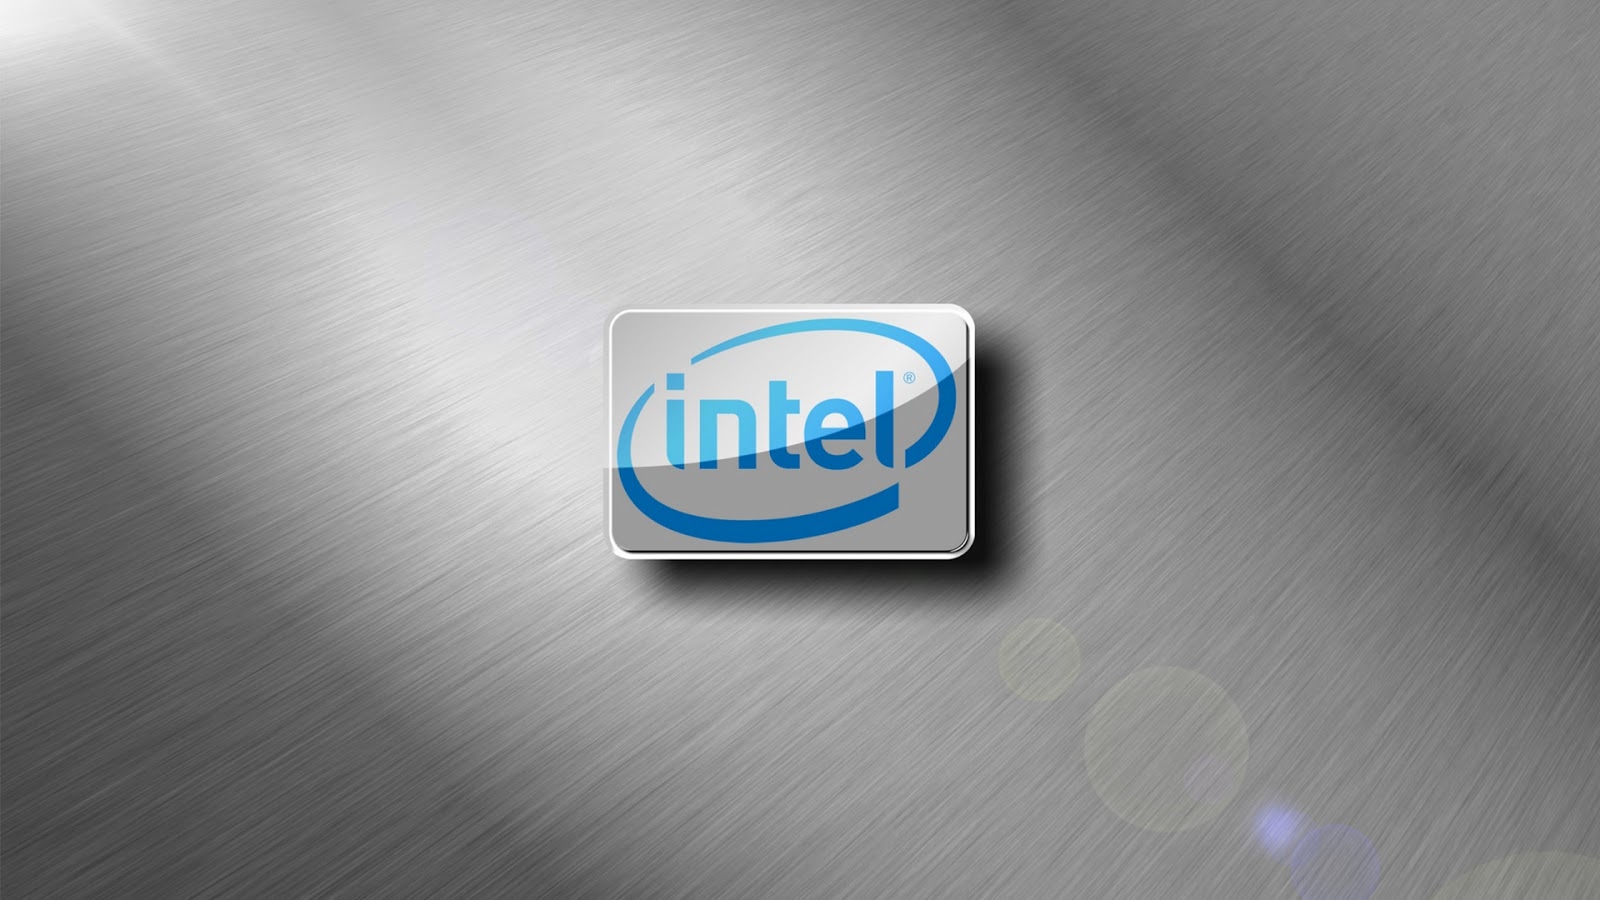 Intel HD Wallpapers Free Download HD Wallpapers High Definition